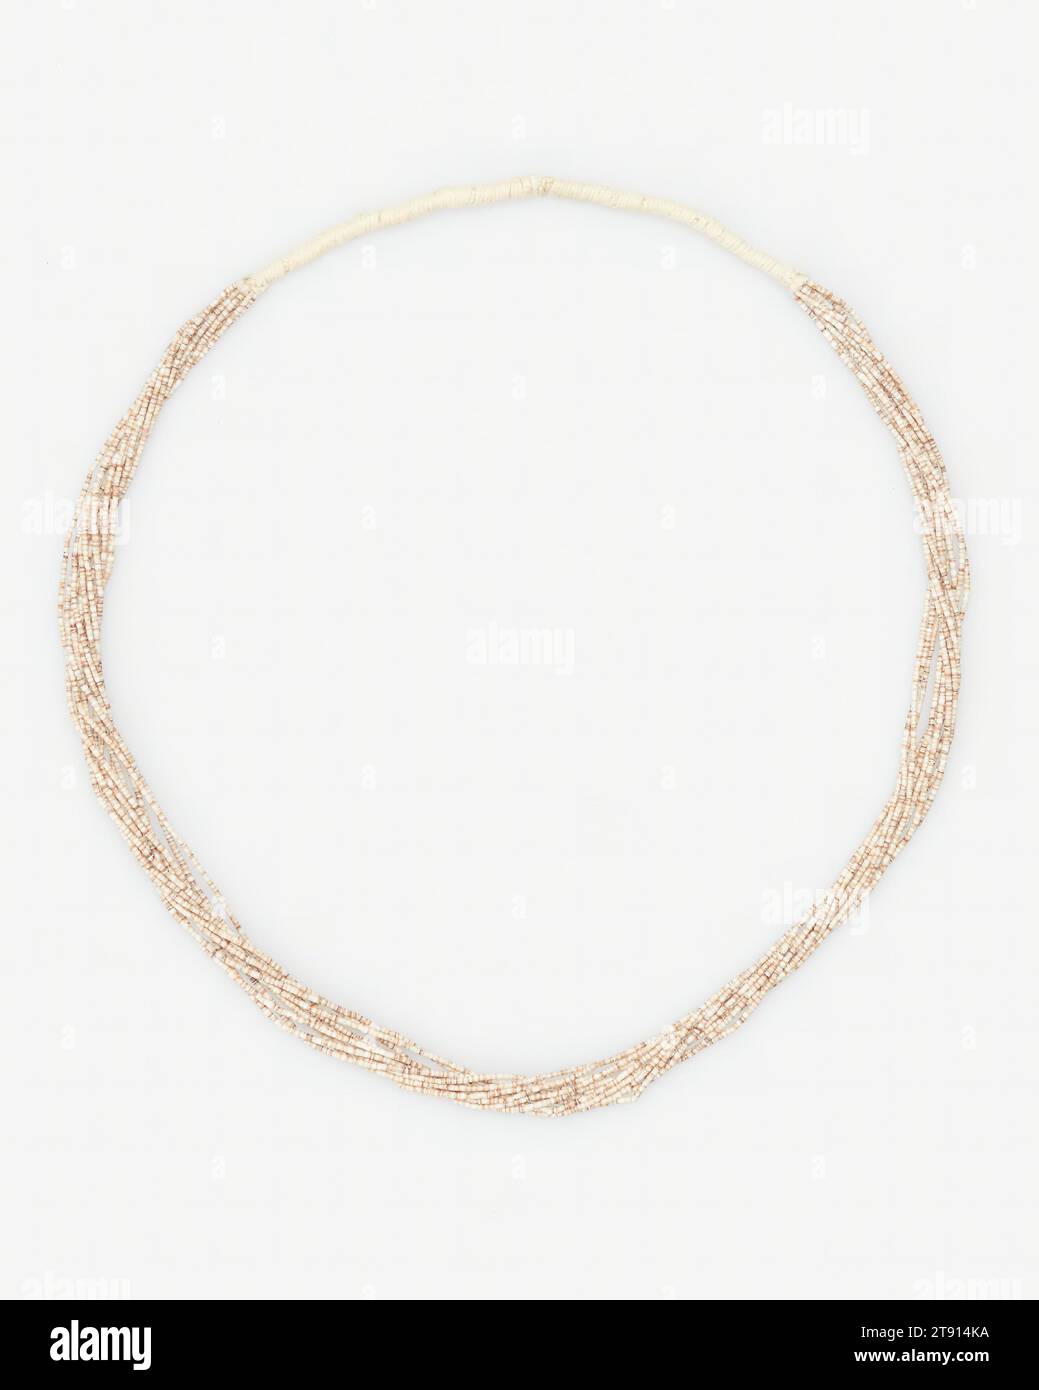 Necklace, 20th century, 13 1/2 in. (34.3 cm), Heishi, United States, 20th century Stock Photo